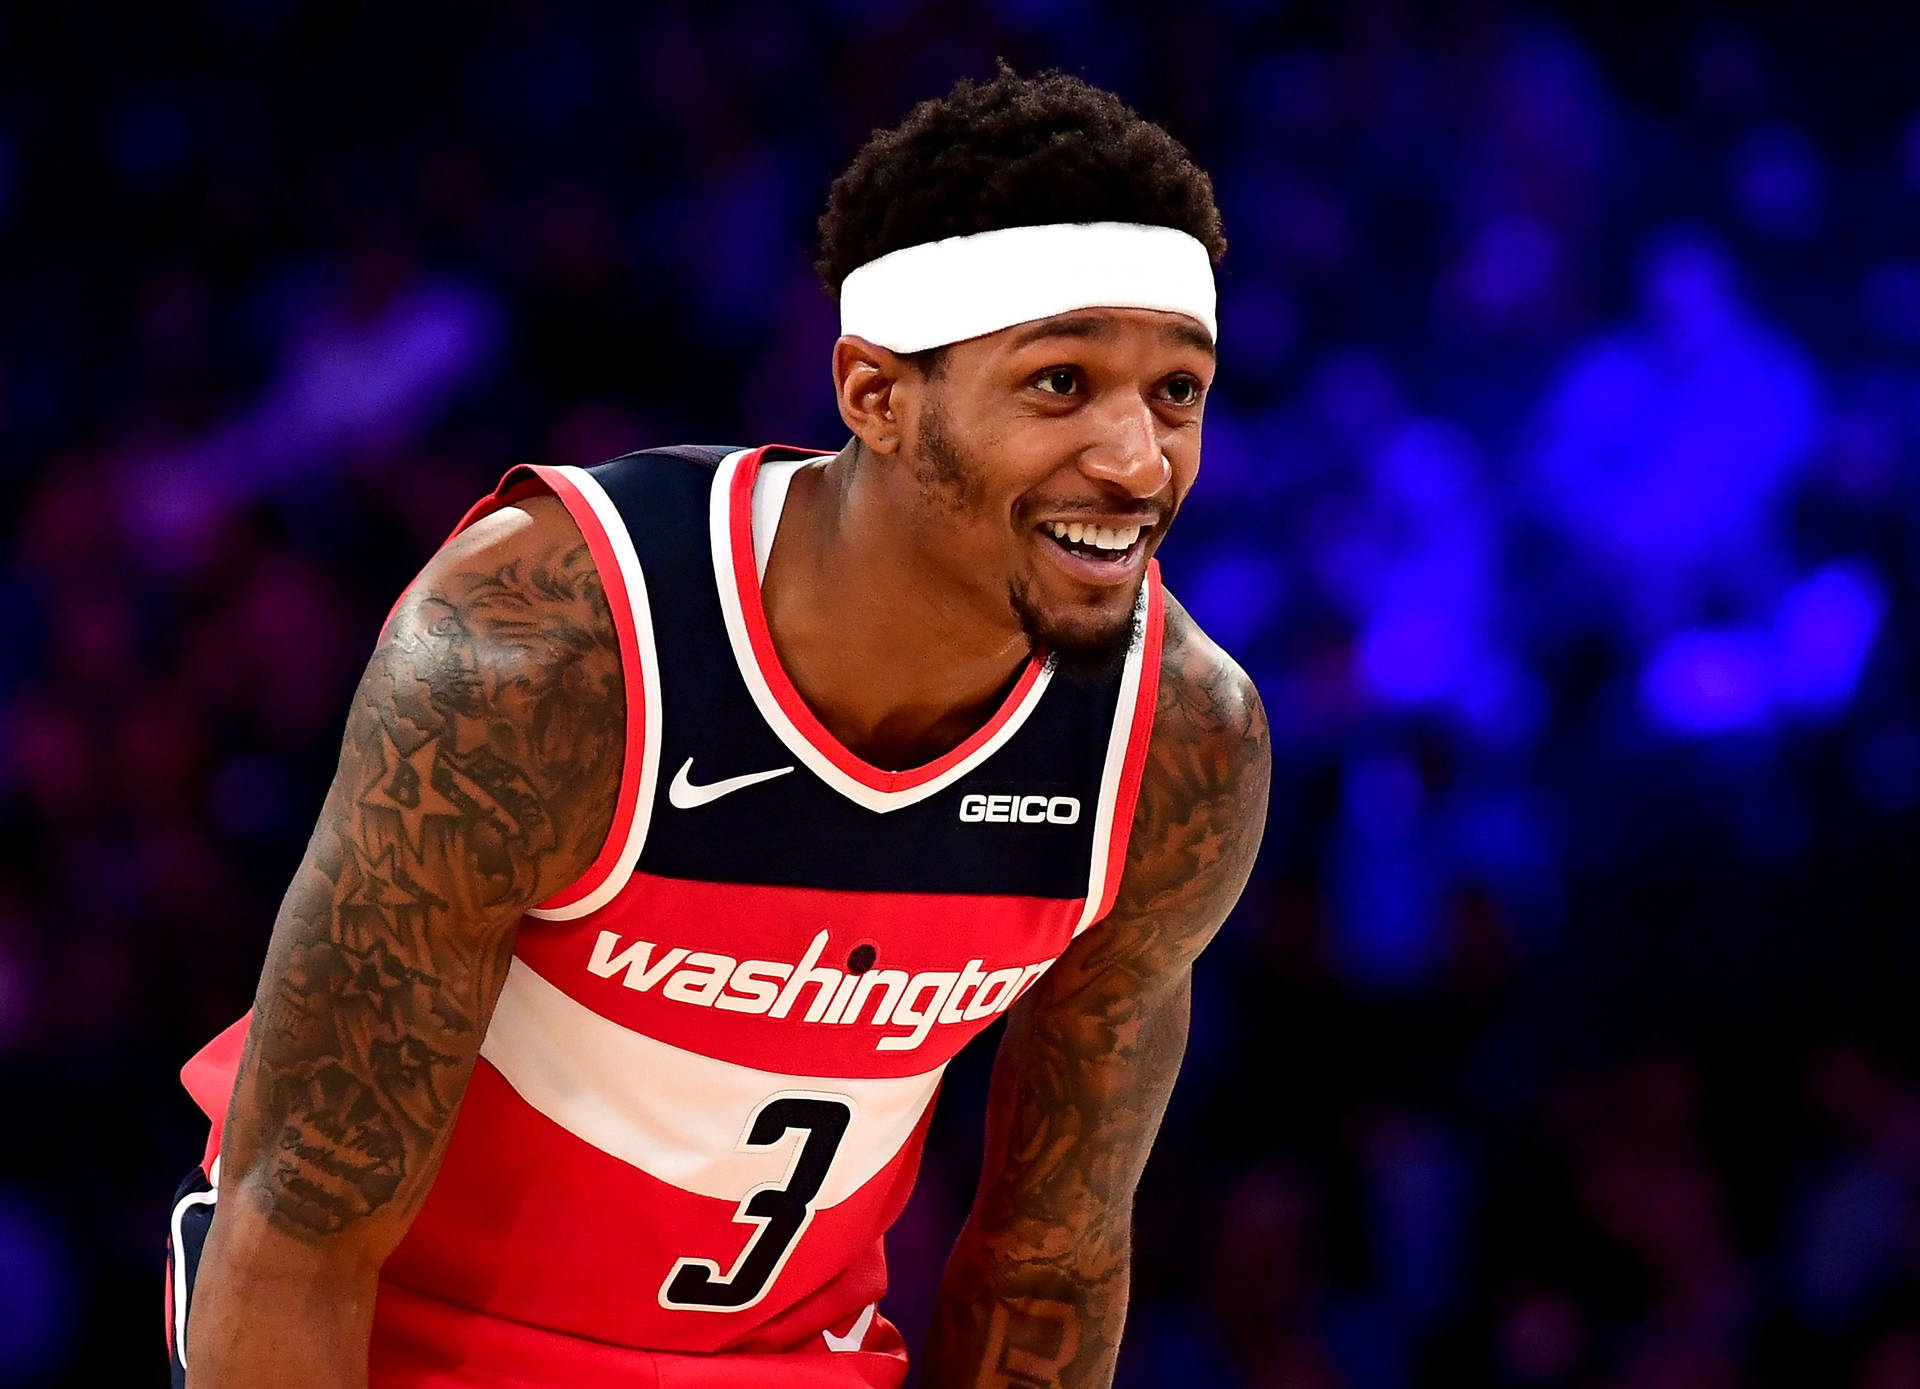 Bradley Beal Candid Smiling Photograph Background